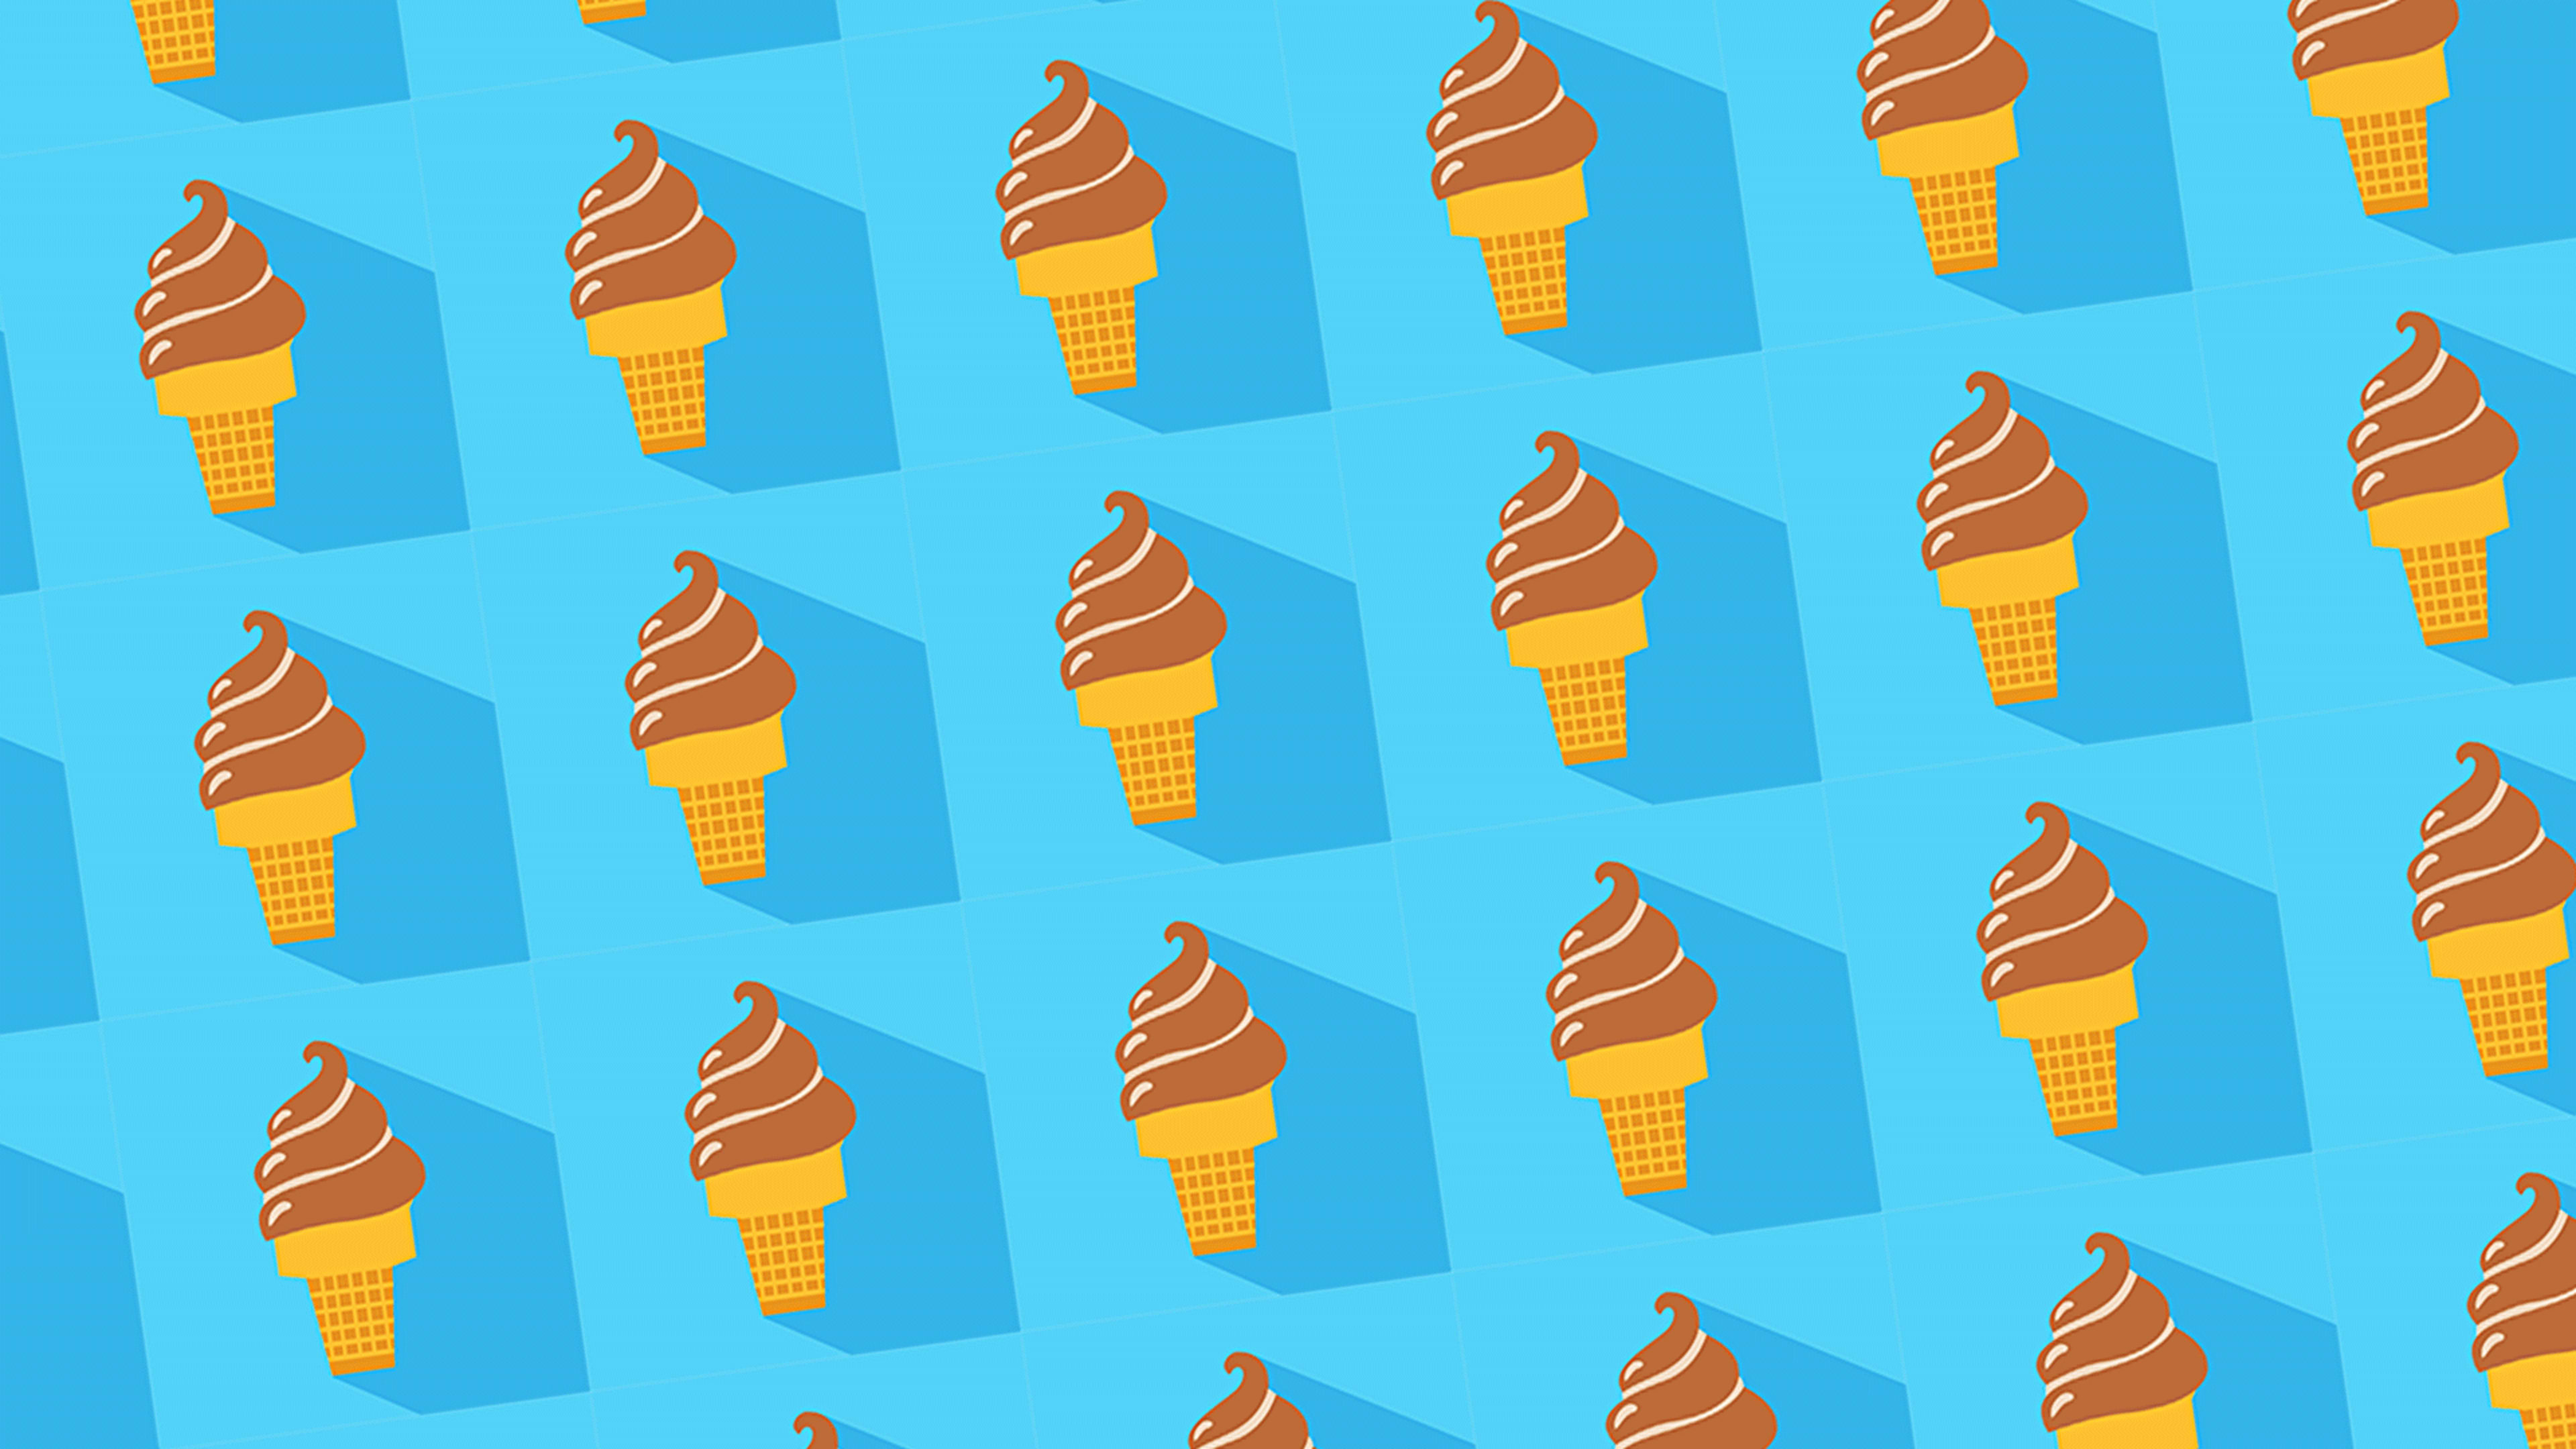 Apple’s original ice-cream cone emoji was topped with poo